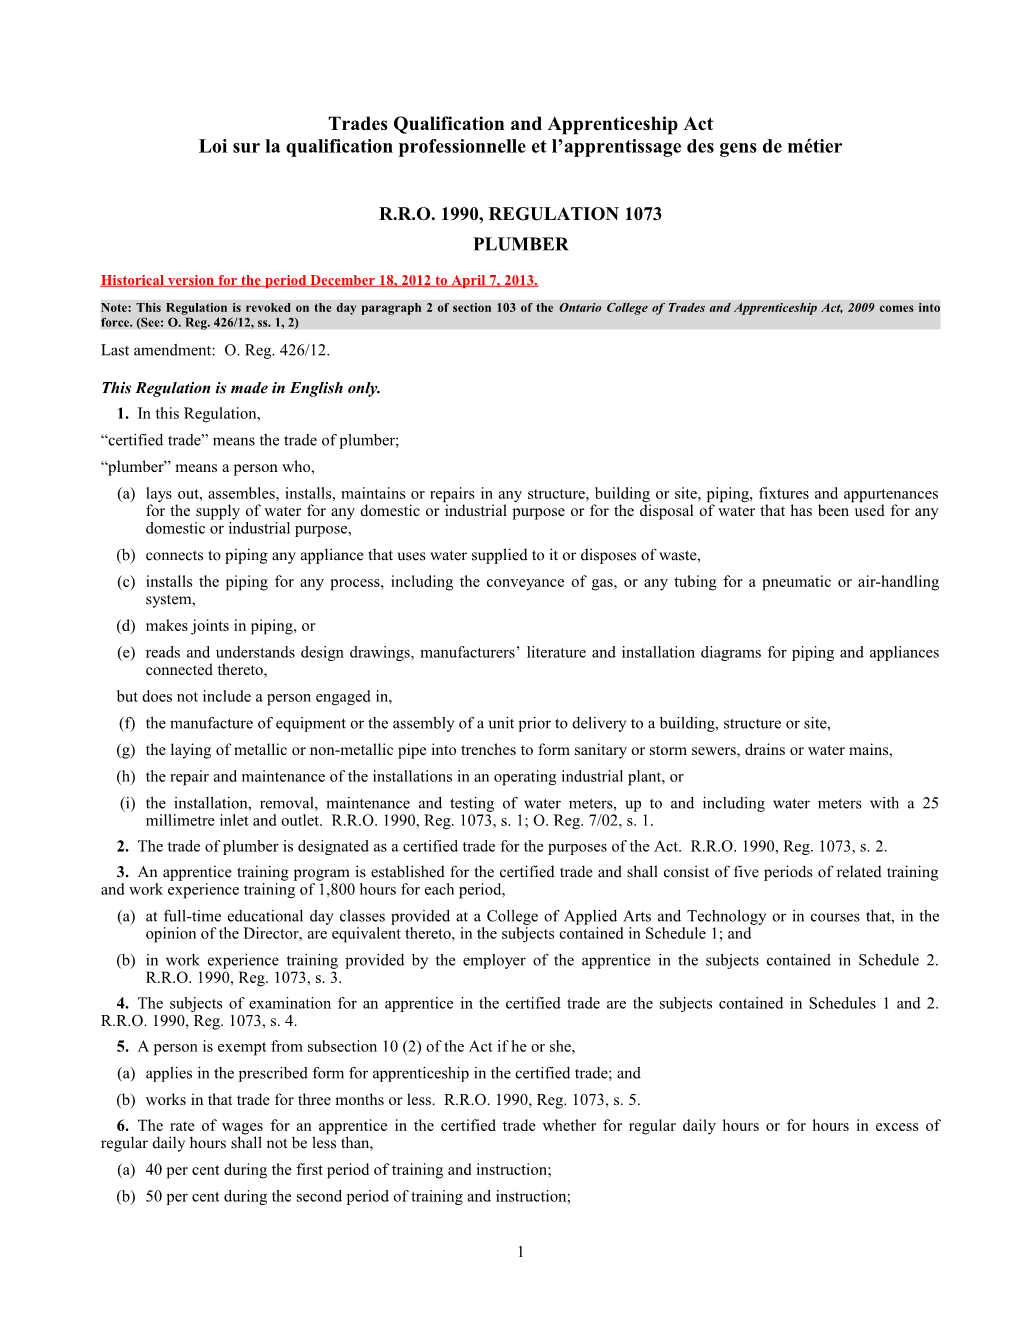 Trades Qualification and Apprenticeship Act - R.R.O. 1990, Reg. 1073